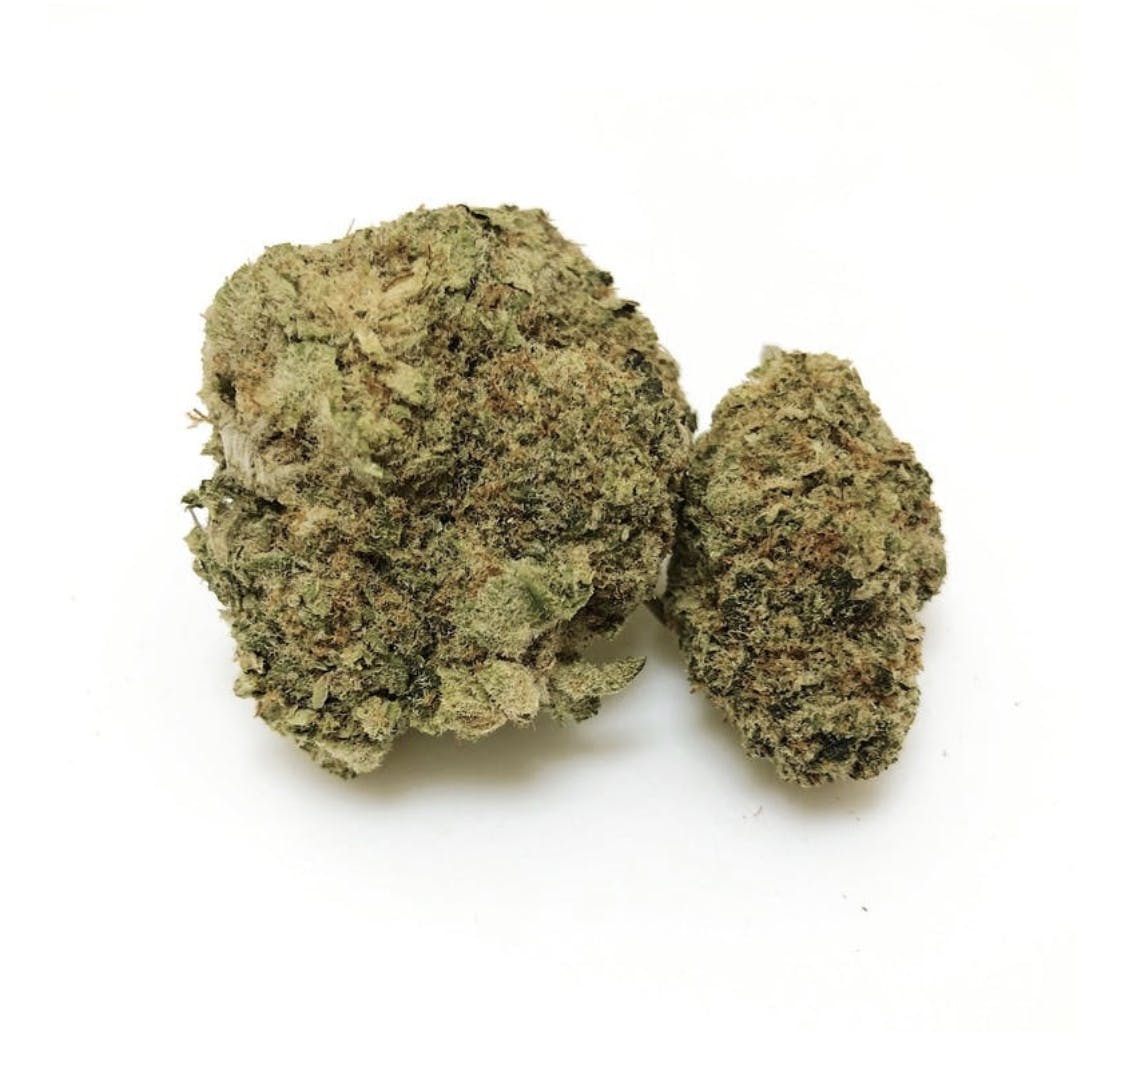 marijuana-dispensaries-7550-se-15th-street-midwest-city-spiked-punch